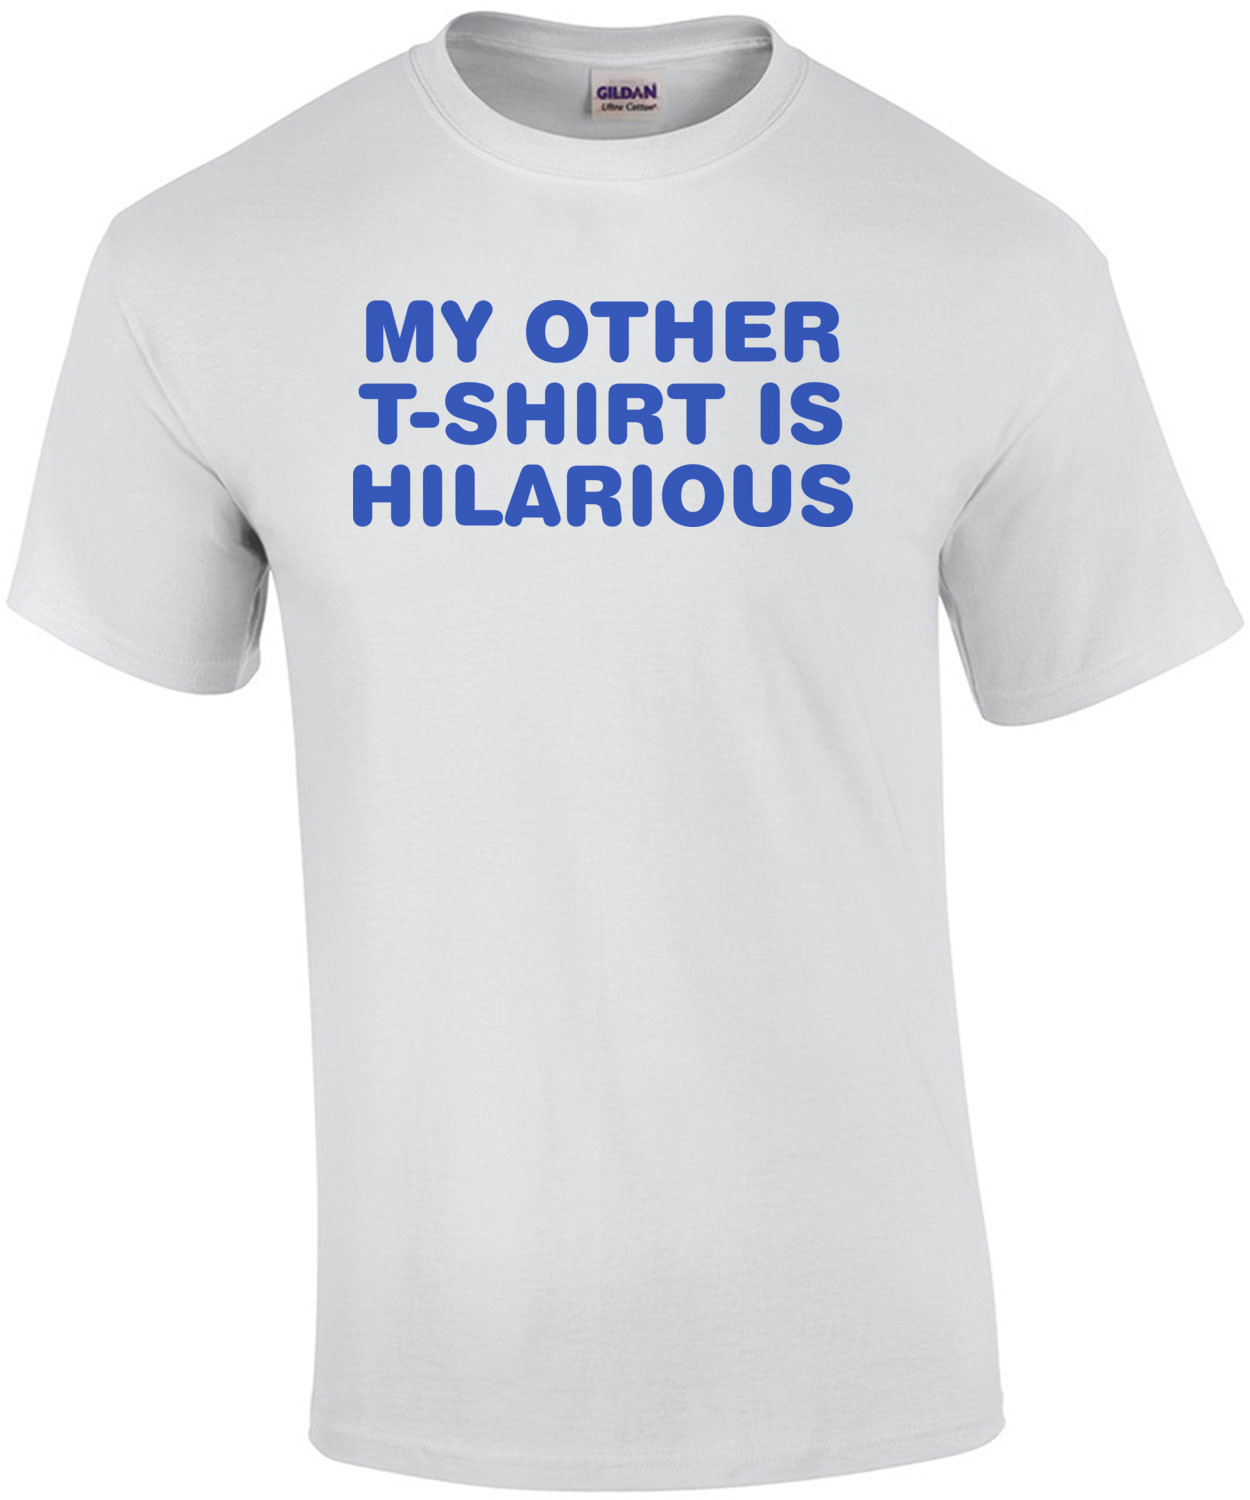 My Other Shirt Is Hilarious - Funny Tee